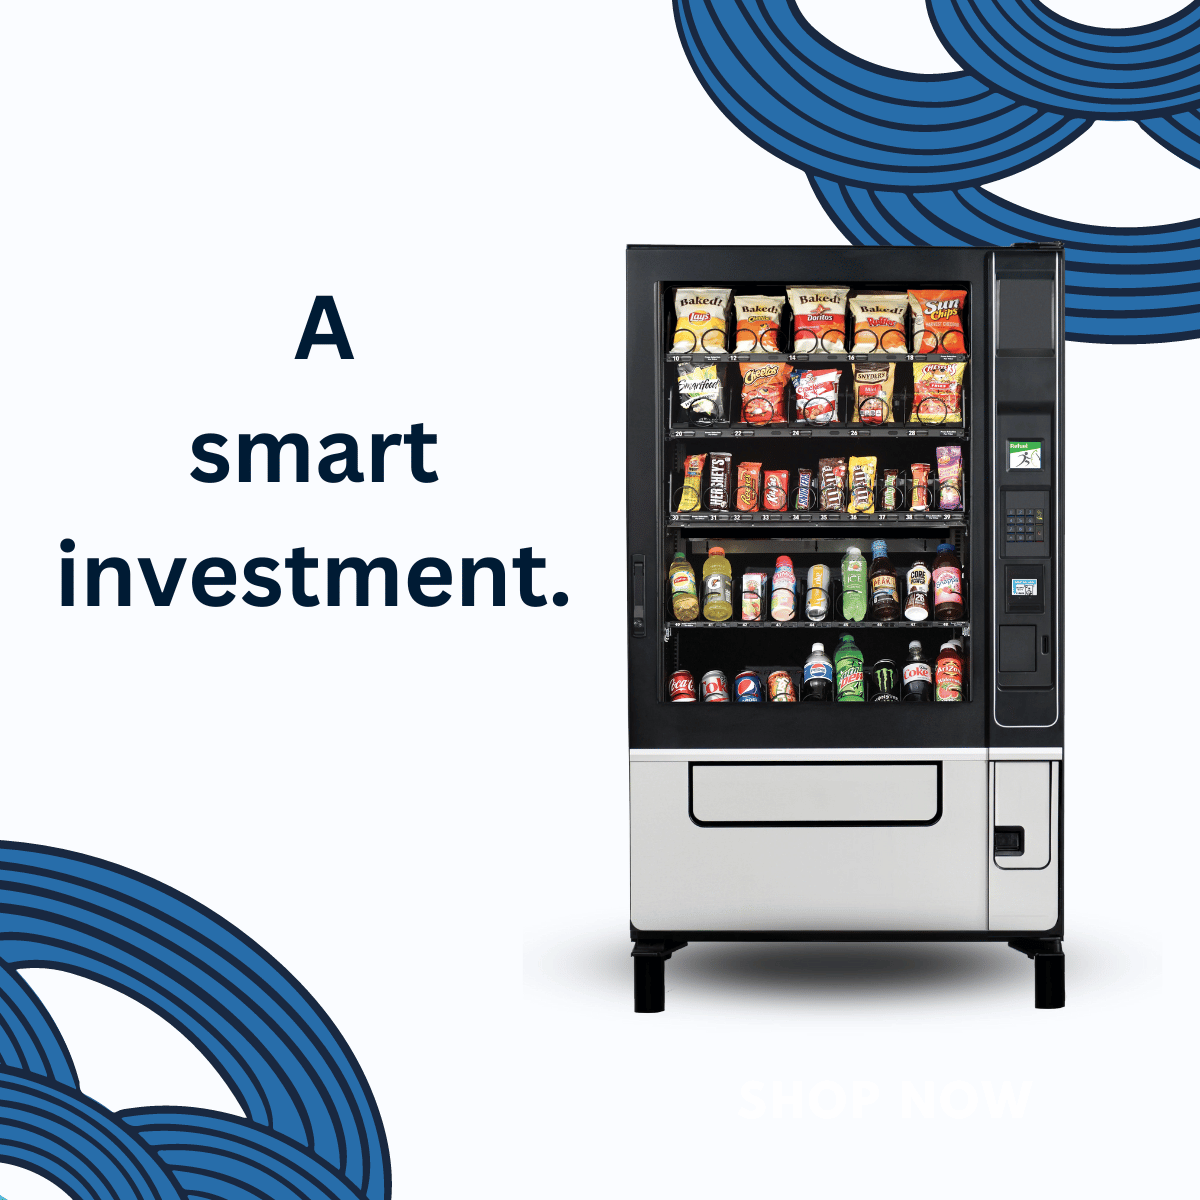 SNACK VENDING MACHINES CAN BECOME A GOOD BUSINESS INVESTMENT